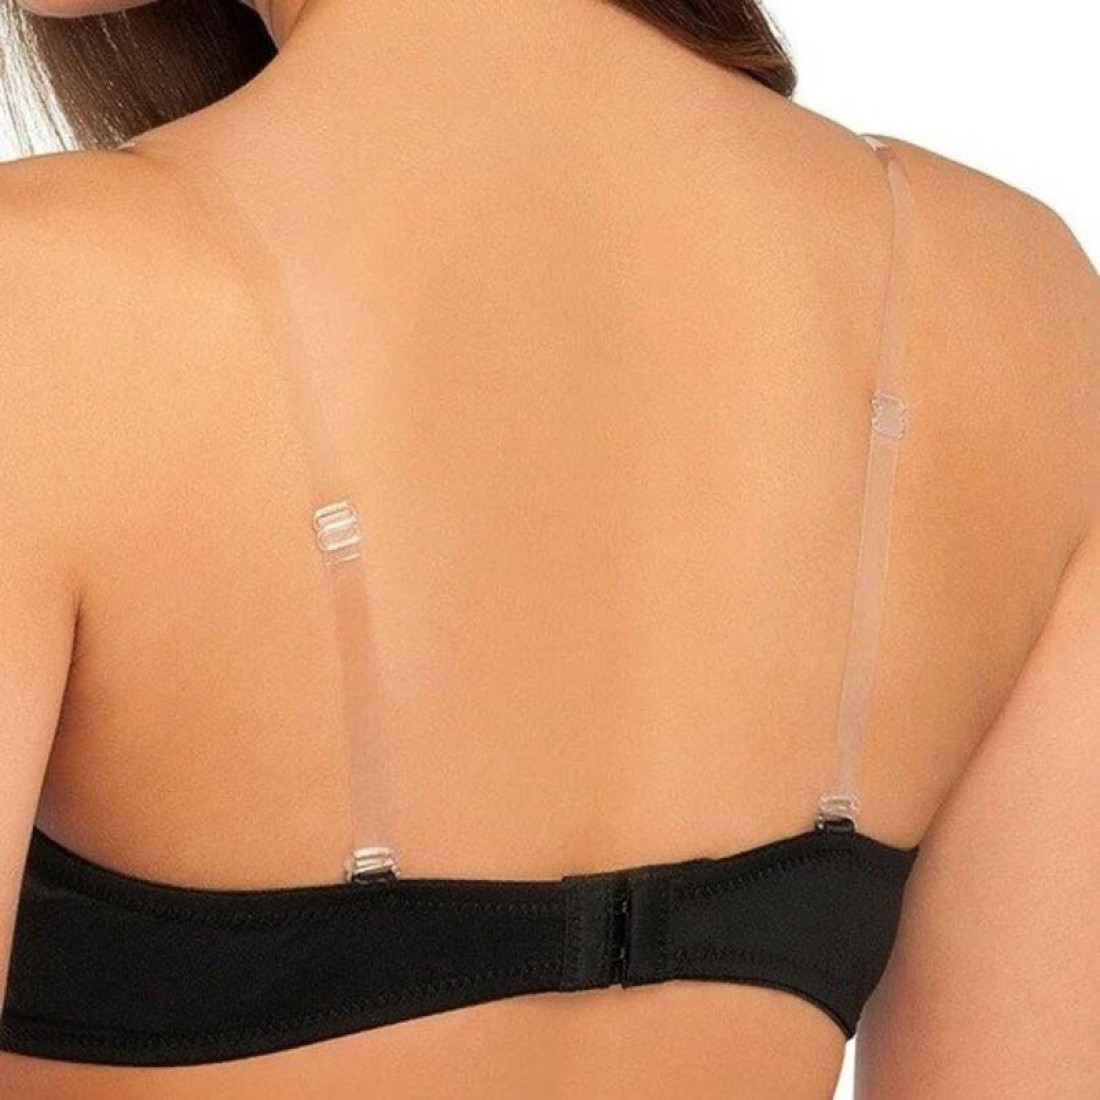 QAUKY QAUKY Women Cotton Padded Backless Invisible Clear